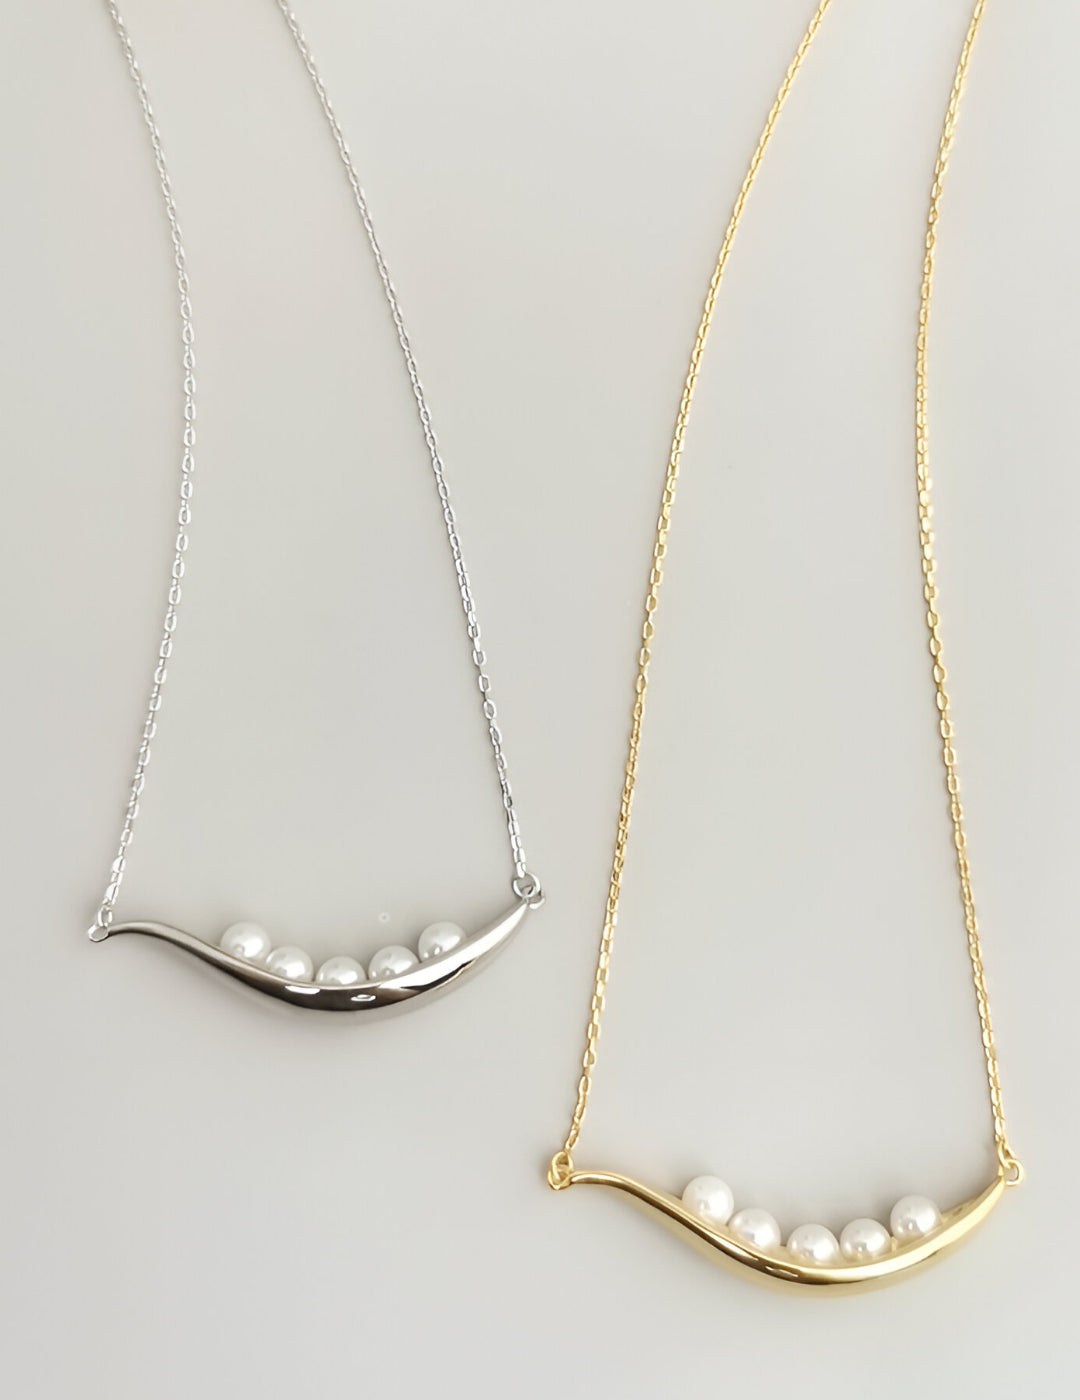 Boat-Inspired Necklace with Lustrous Pearls - S925 Sterling Silver with 18K Gold Vermeil  - Pearl Luminance - Feel the gentle ocean breeze with every wear